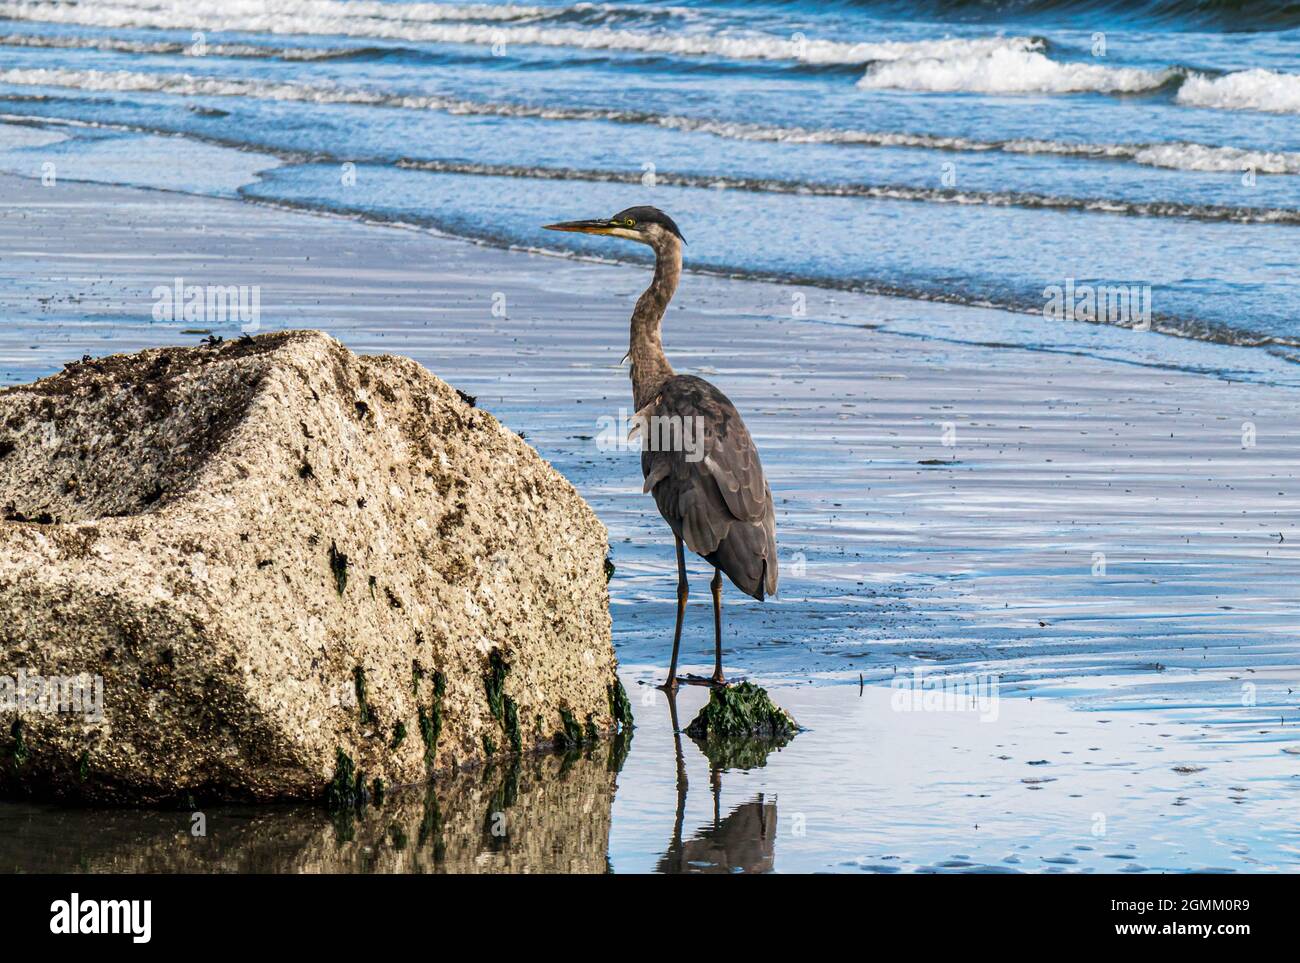 Ardea Herodias, or Great Blue Heron standing on a beach beside a granite rock. Lapping waves, blue water, reflection on wet sandy beach. Stock Photo